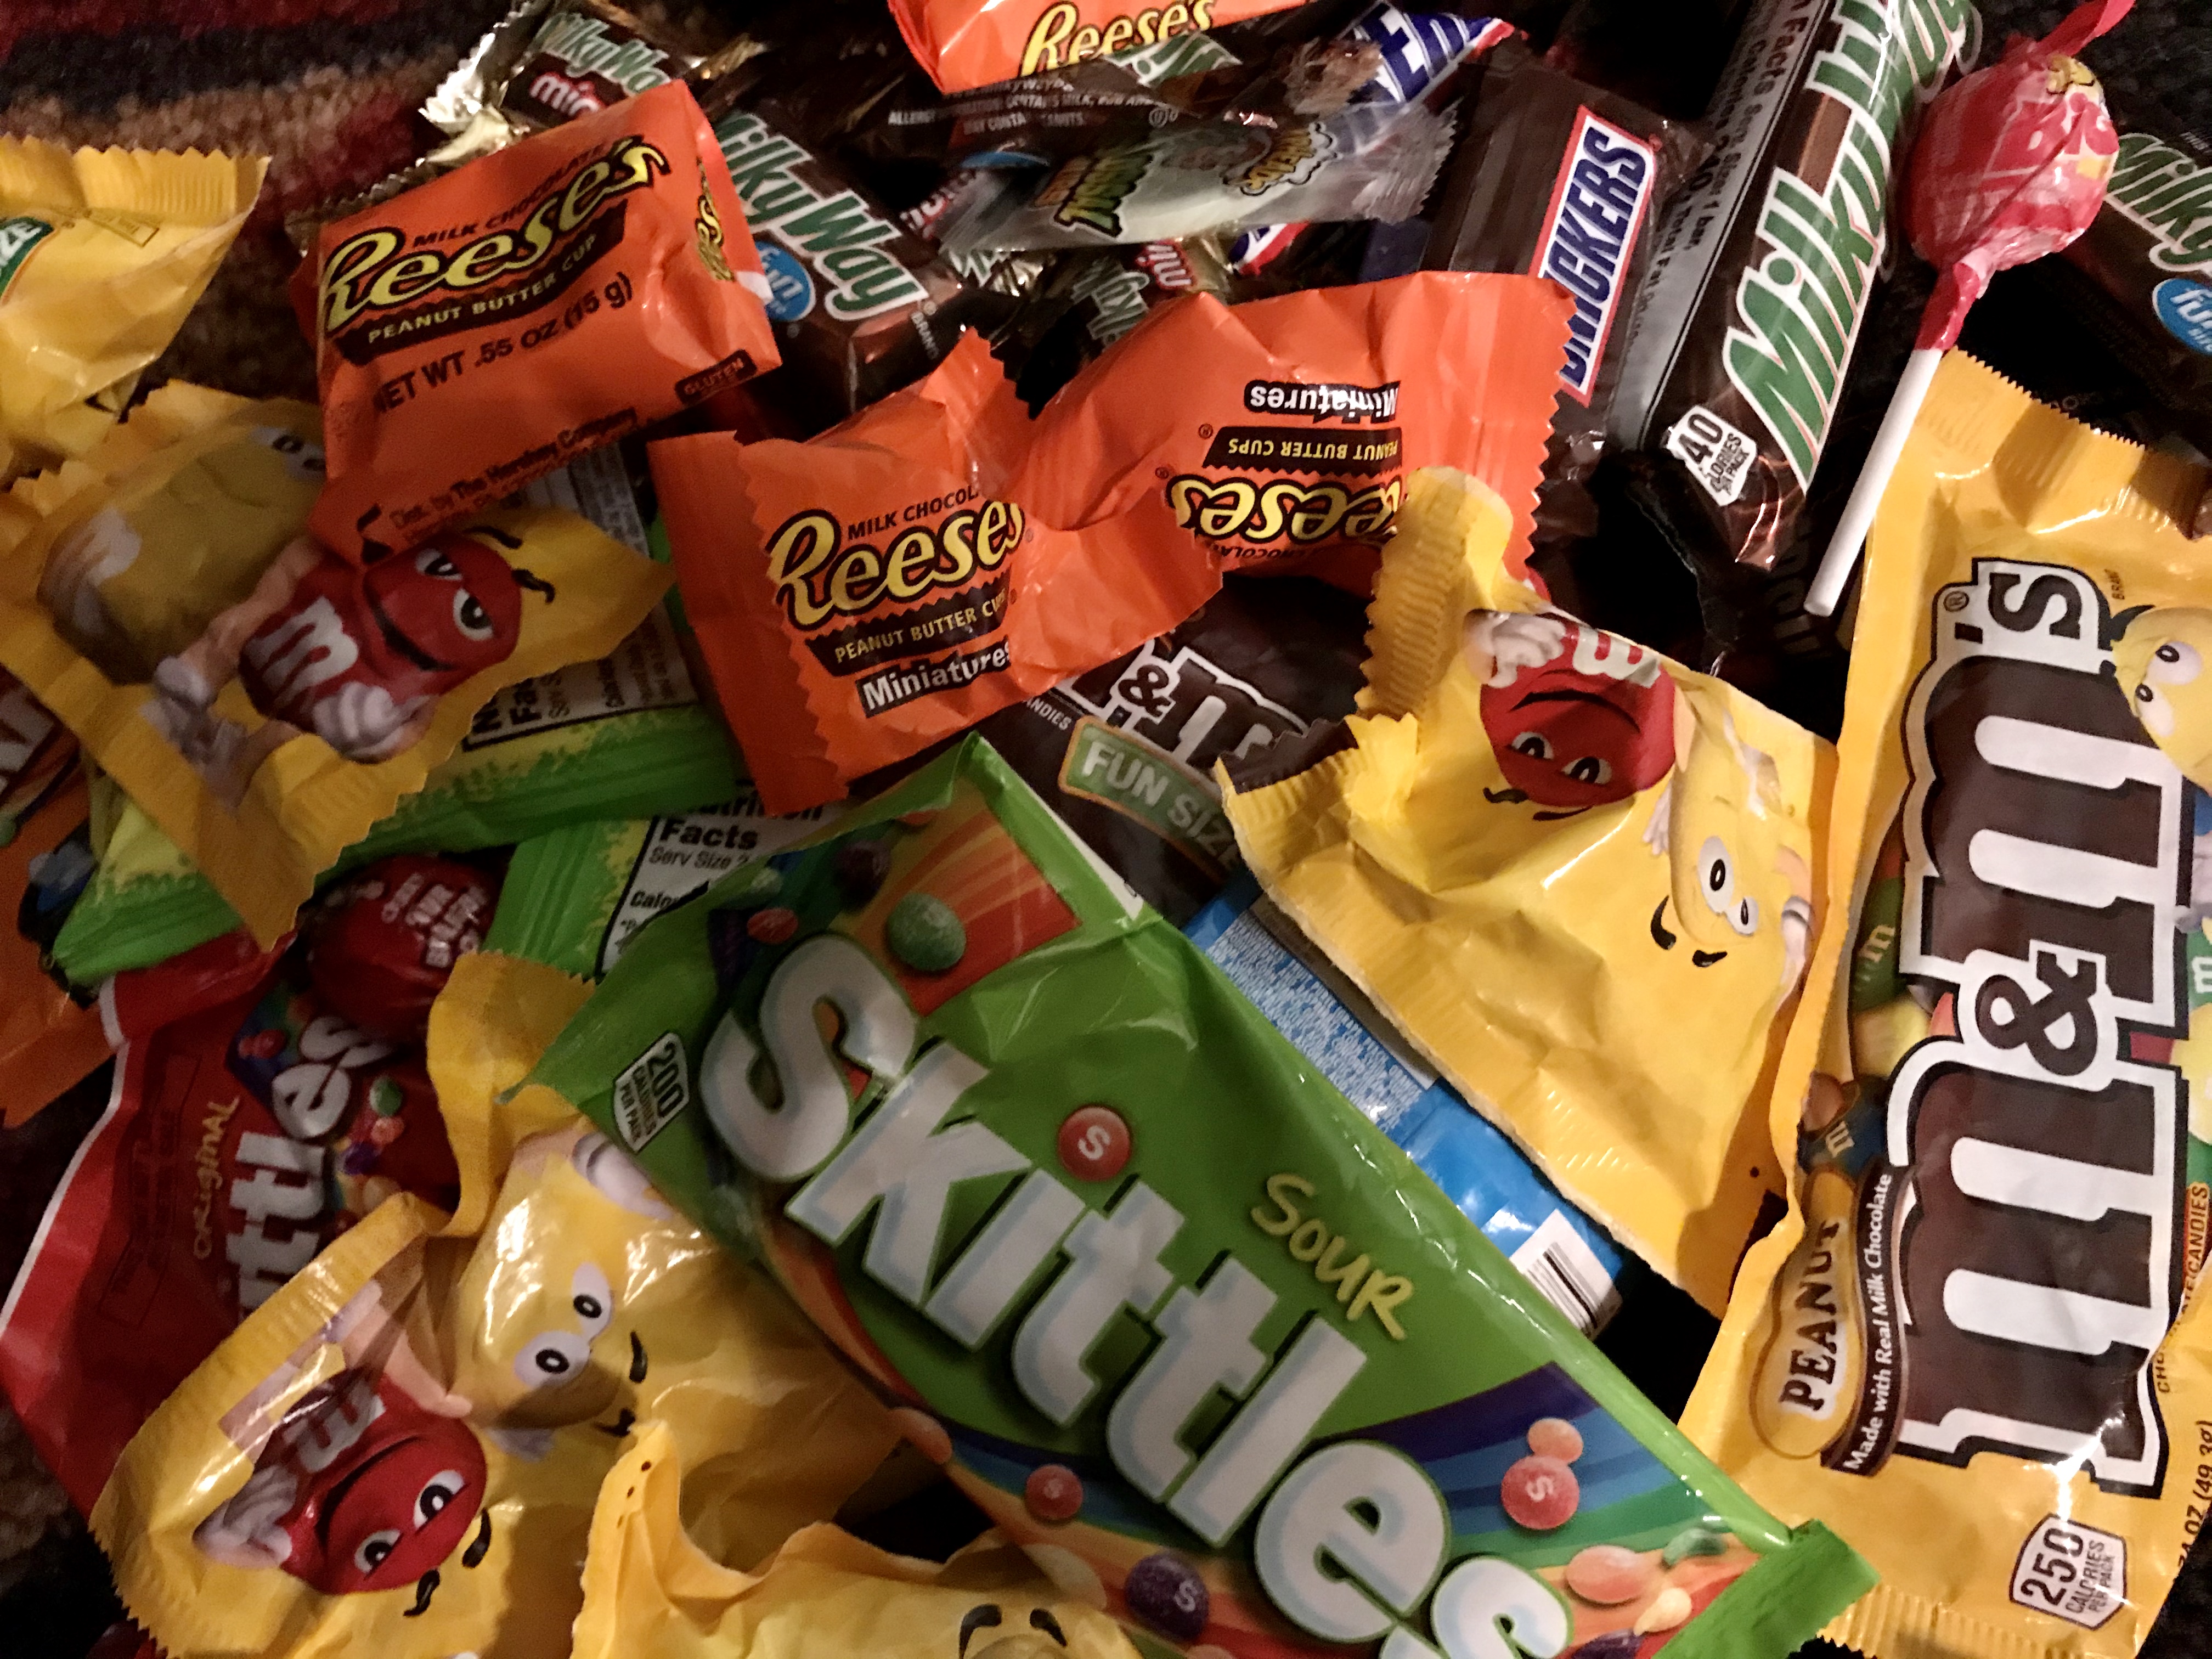 Top 8 Ways to Get Rid of Extra Halloween Candy